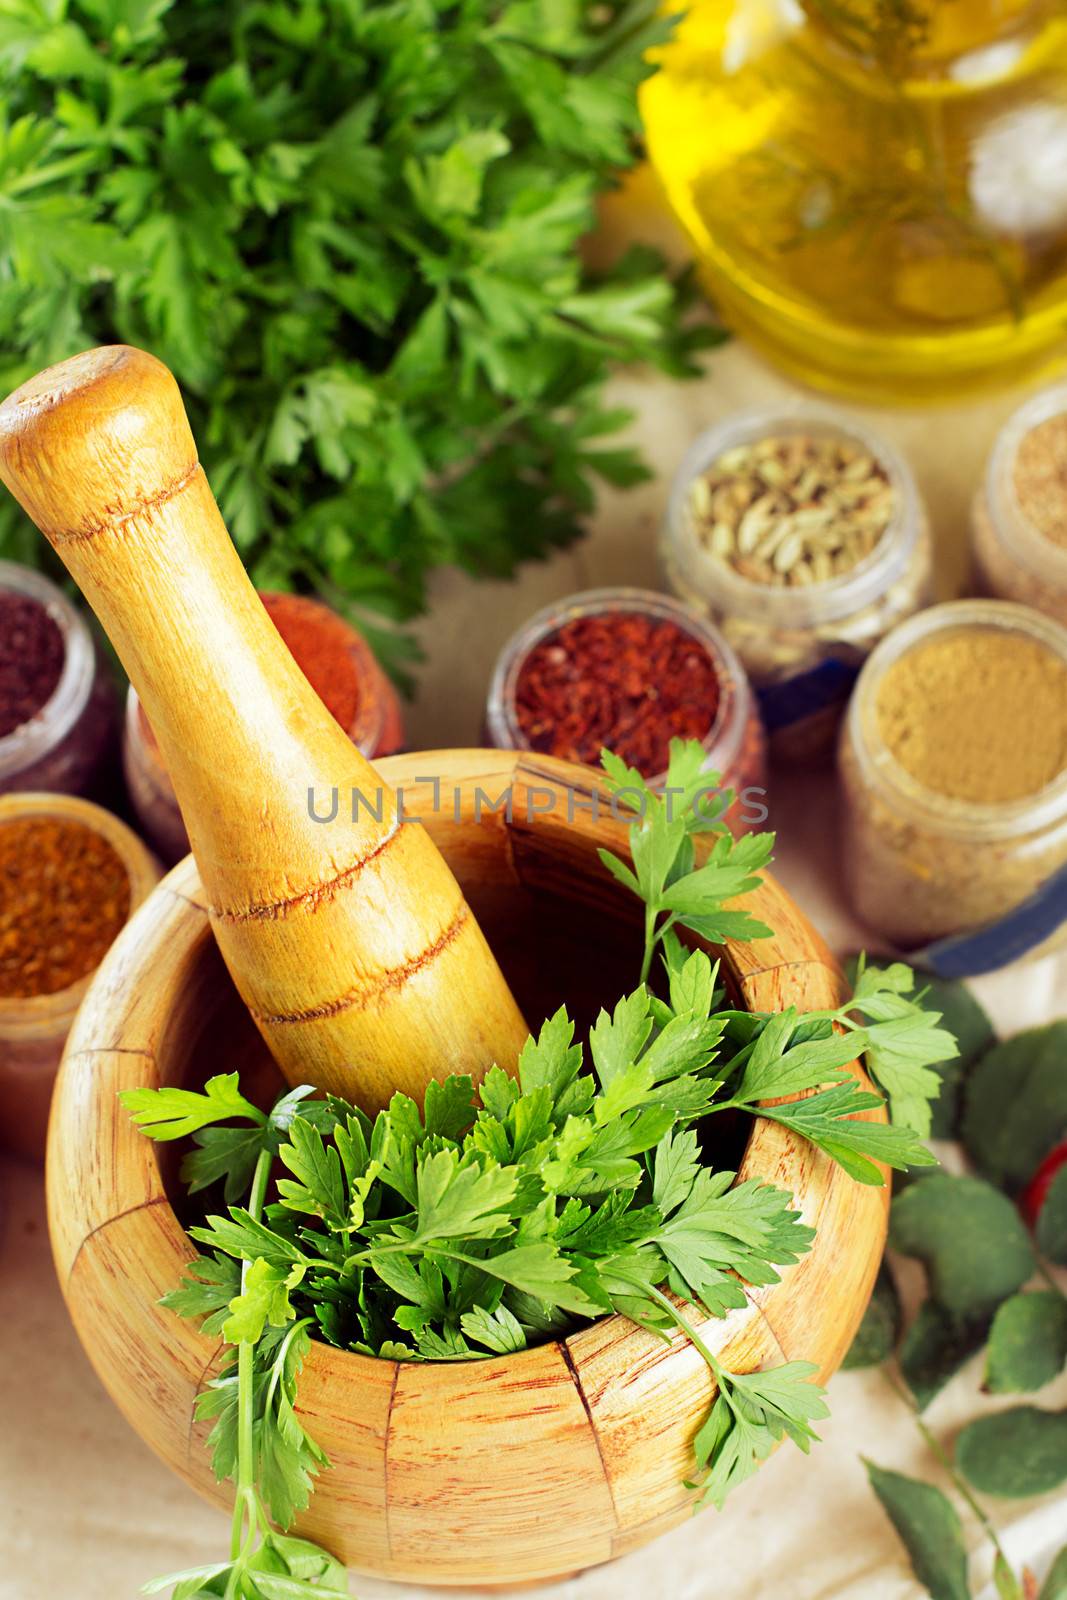 Mortar and pestle, spices on table